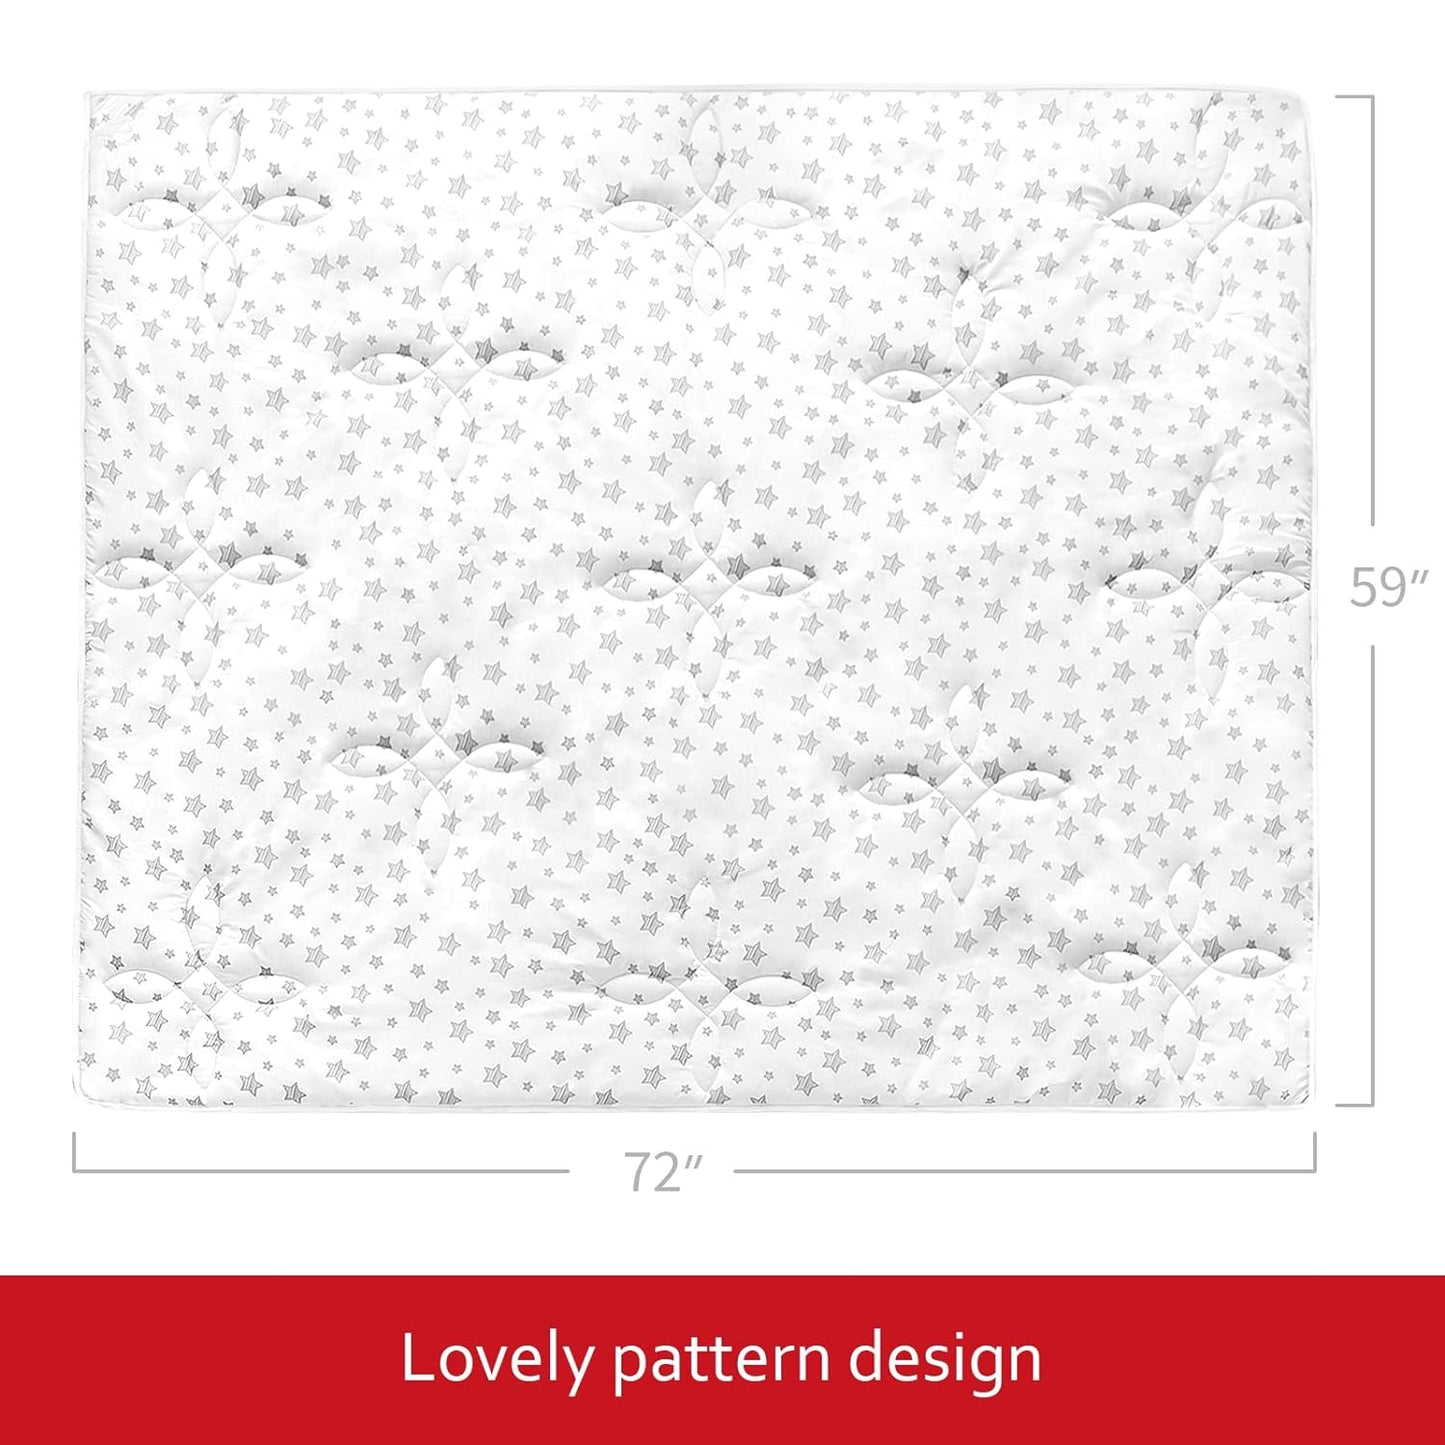 Baby Play Mat | Playpen Mat - 72" x 59", Large Padded Tummy Time Activity Mat for Infant & Toddler, Quilted with Four-Leaf Clover, White Star